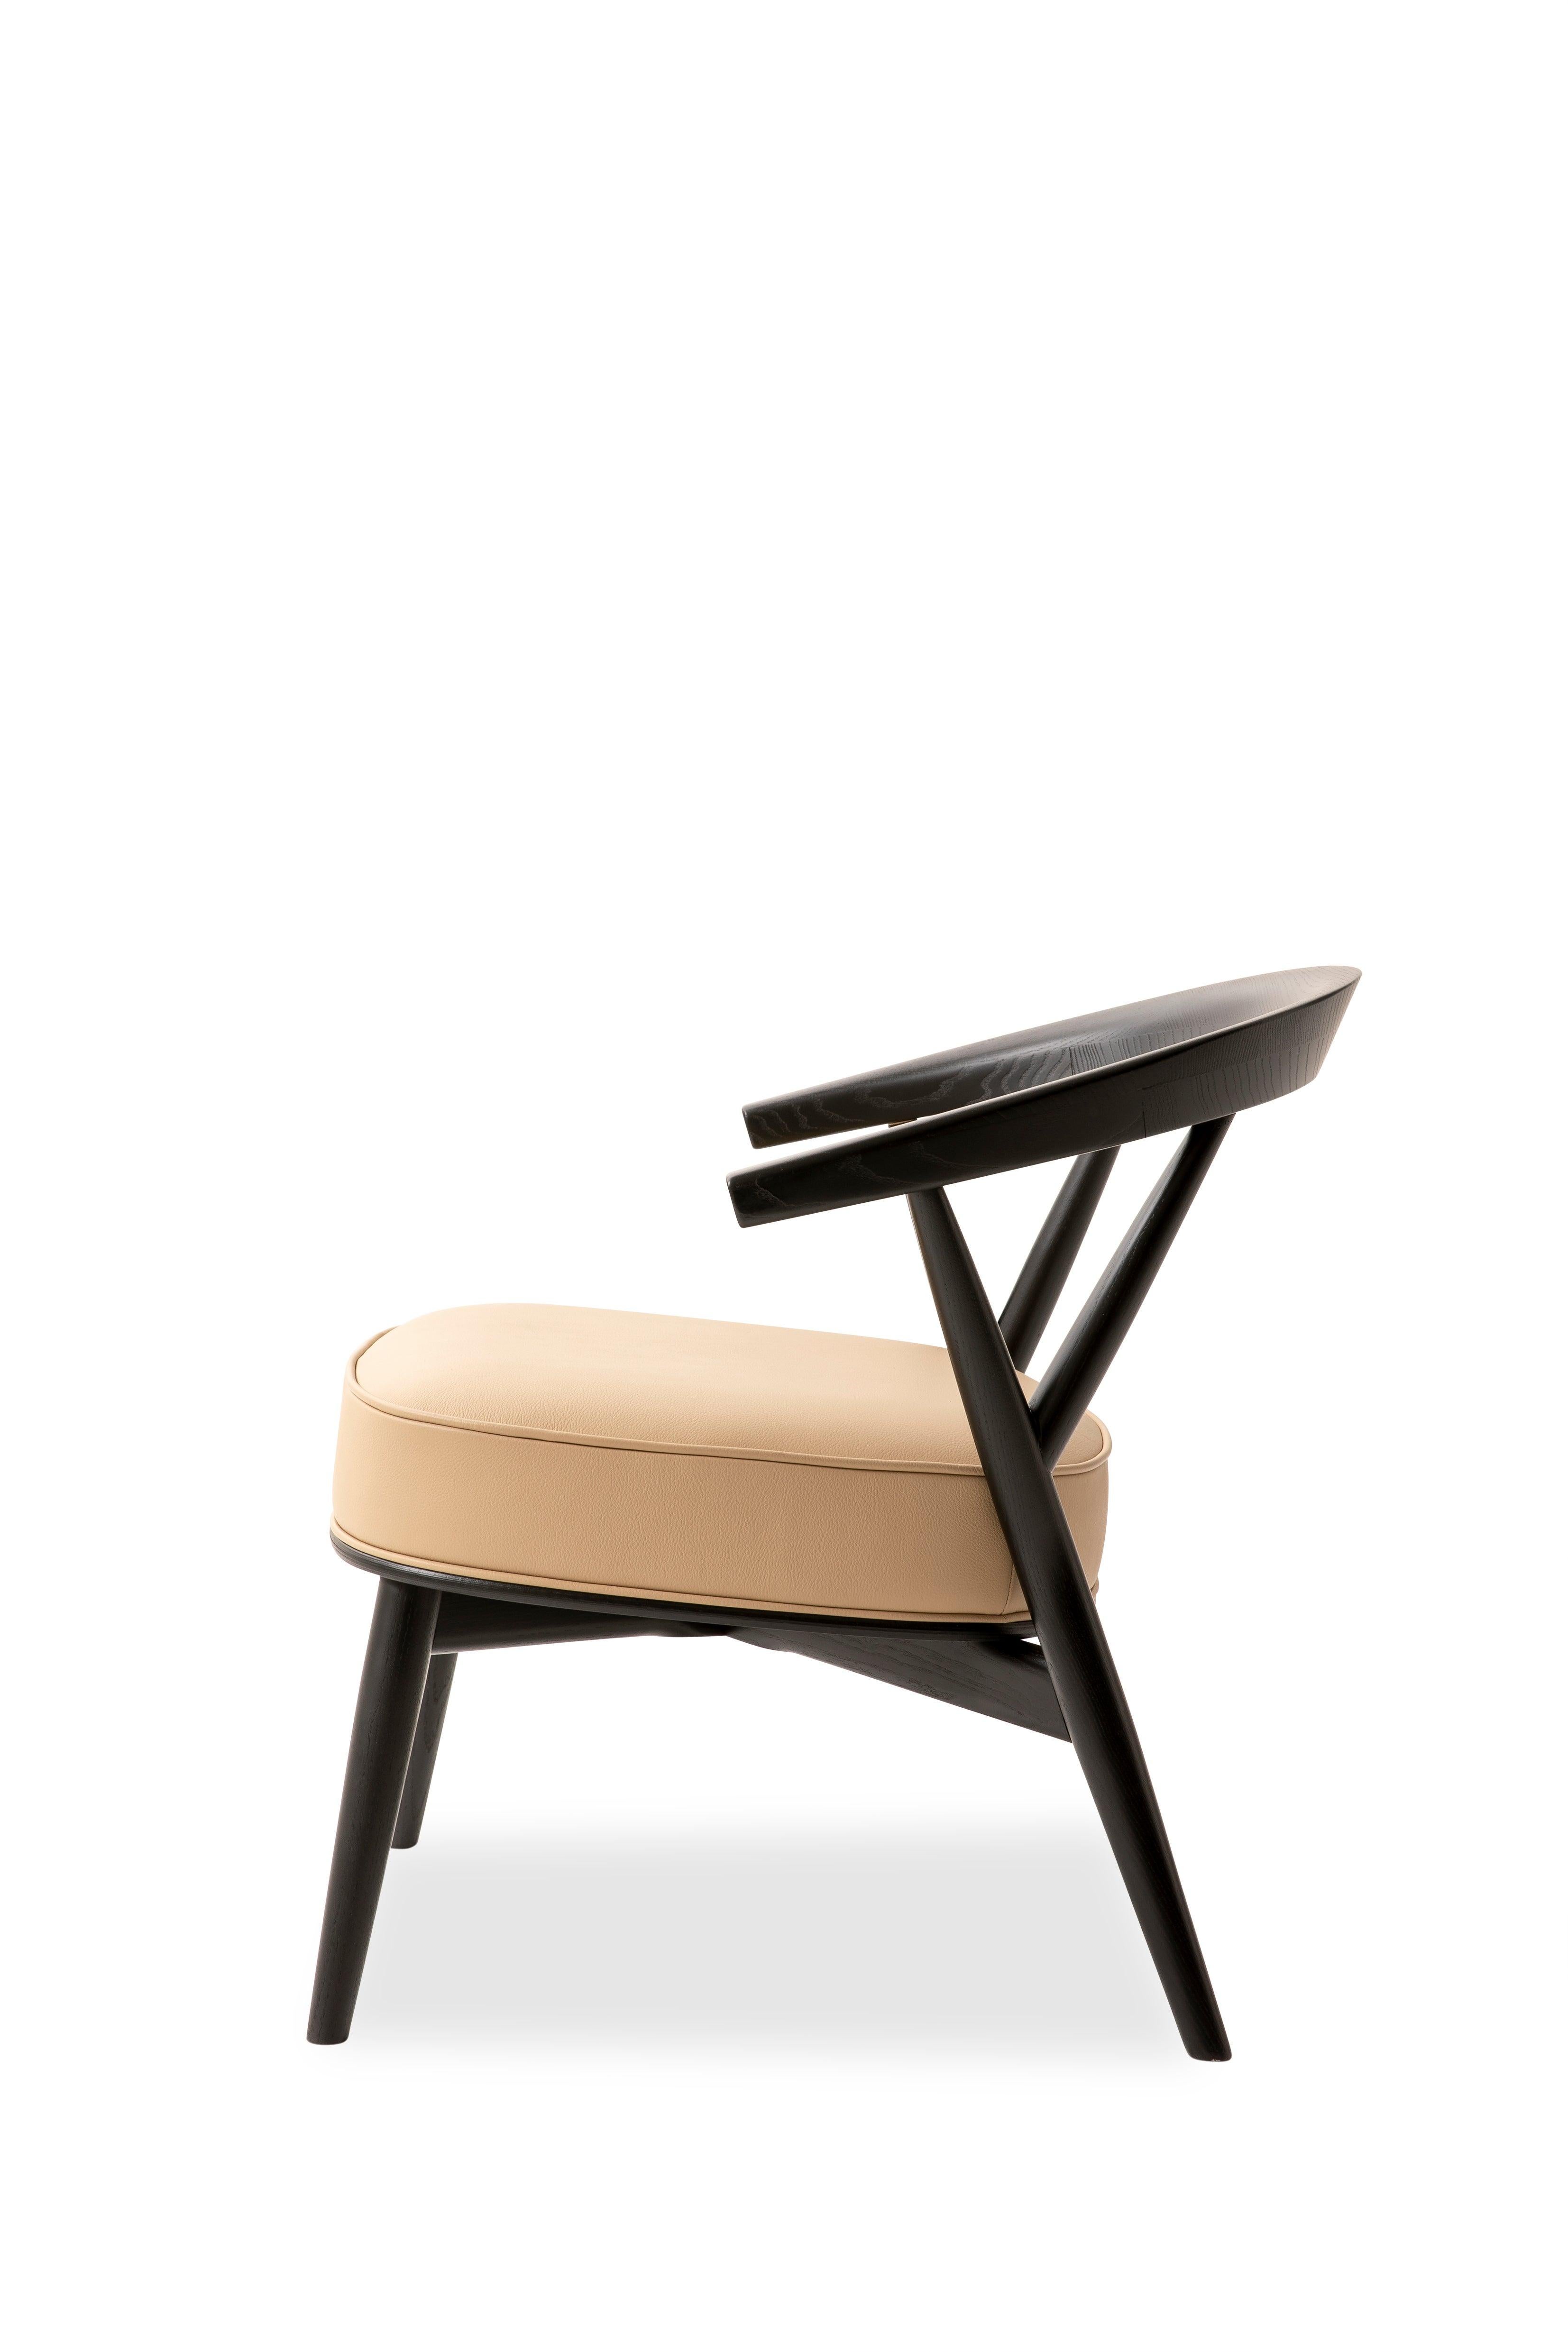 Modern Newood Relax Light Armchair in Beech and Cream Leather by Brogliato Traverso For Sale